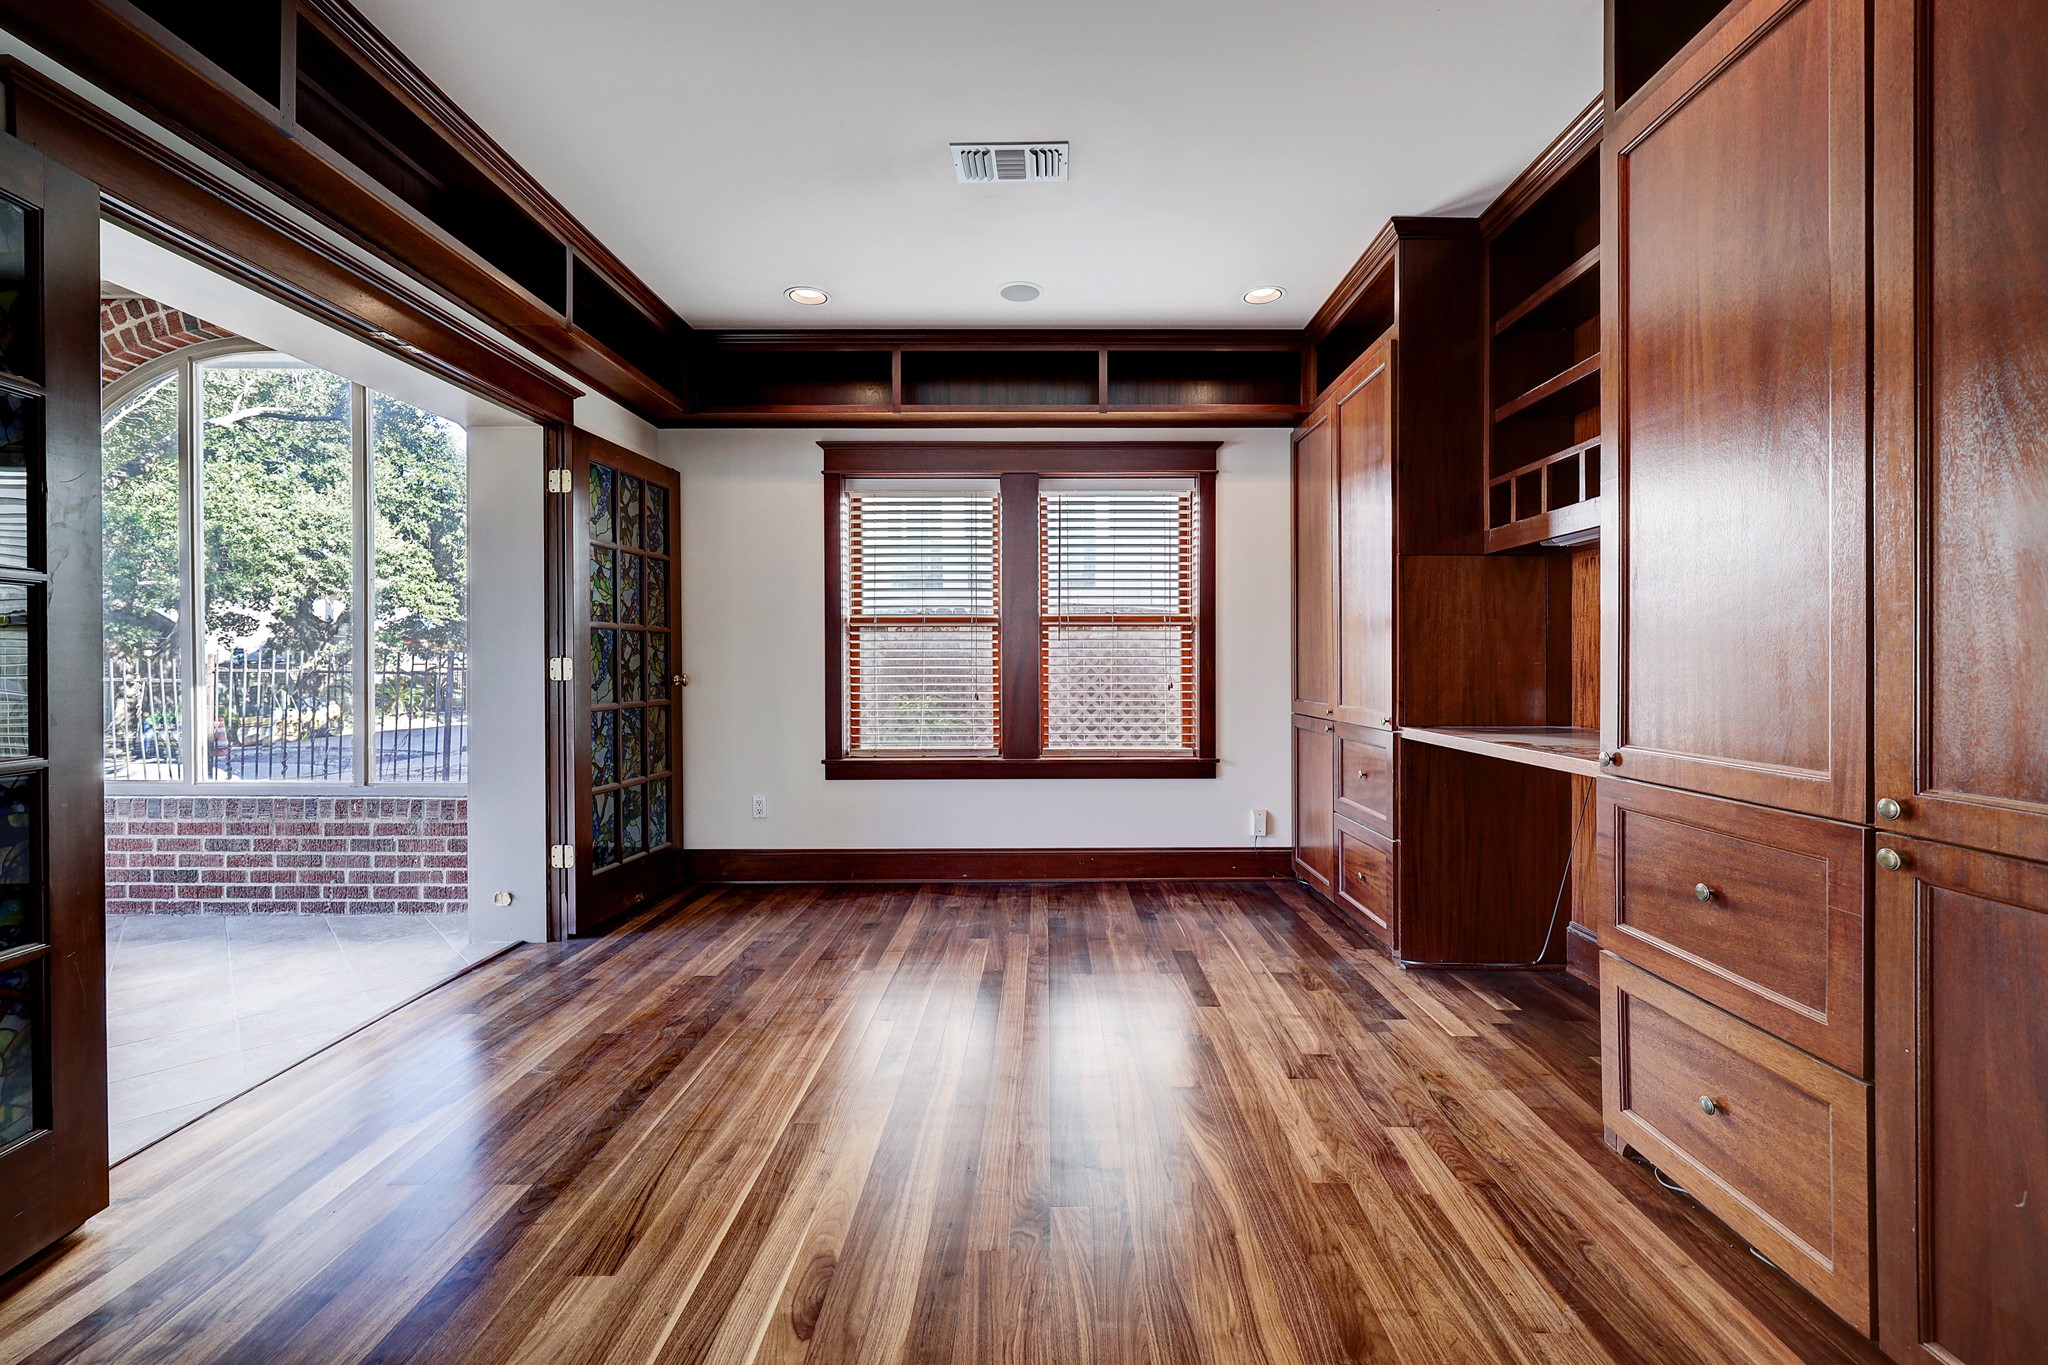 To the left of the formal living sits the private library which is complete with custom built-in cabinetry, recessed lighting, and stained glass French doors that lead you to the home’s sunroom.